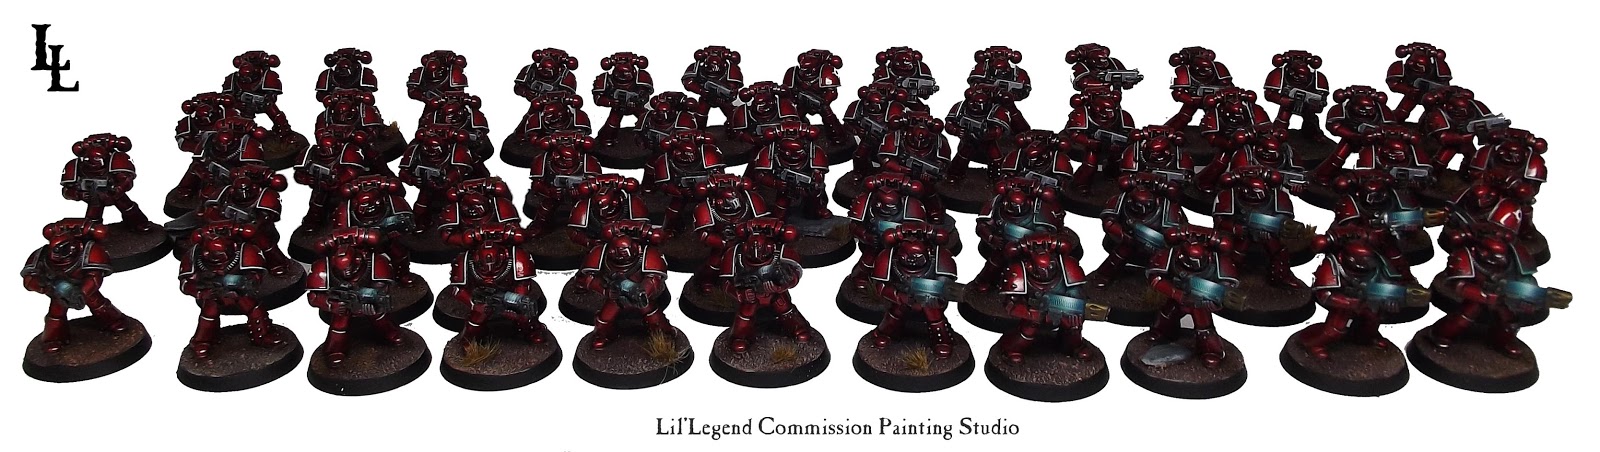 LilLegend Commission Painting Studio: Paint Brushes of Renown